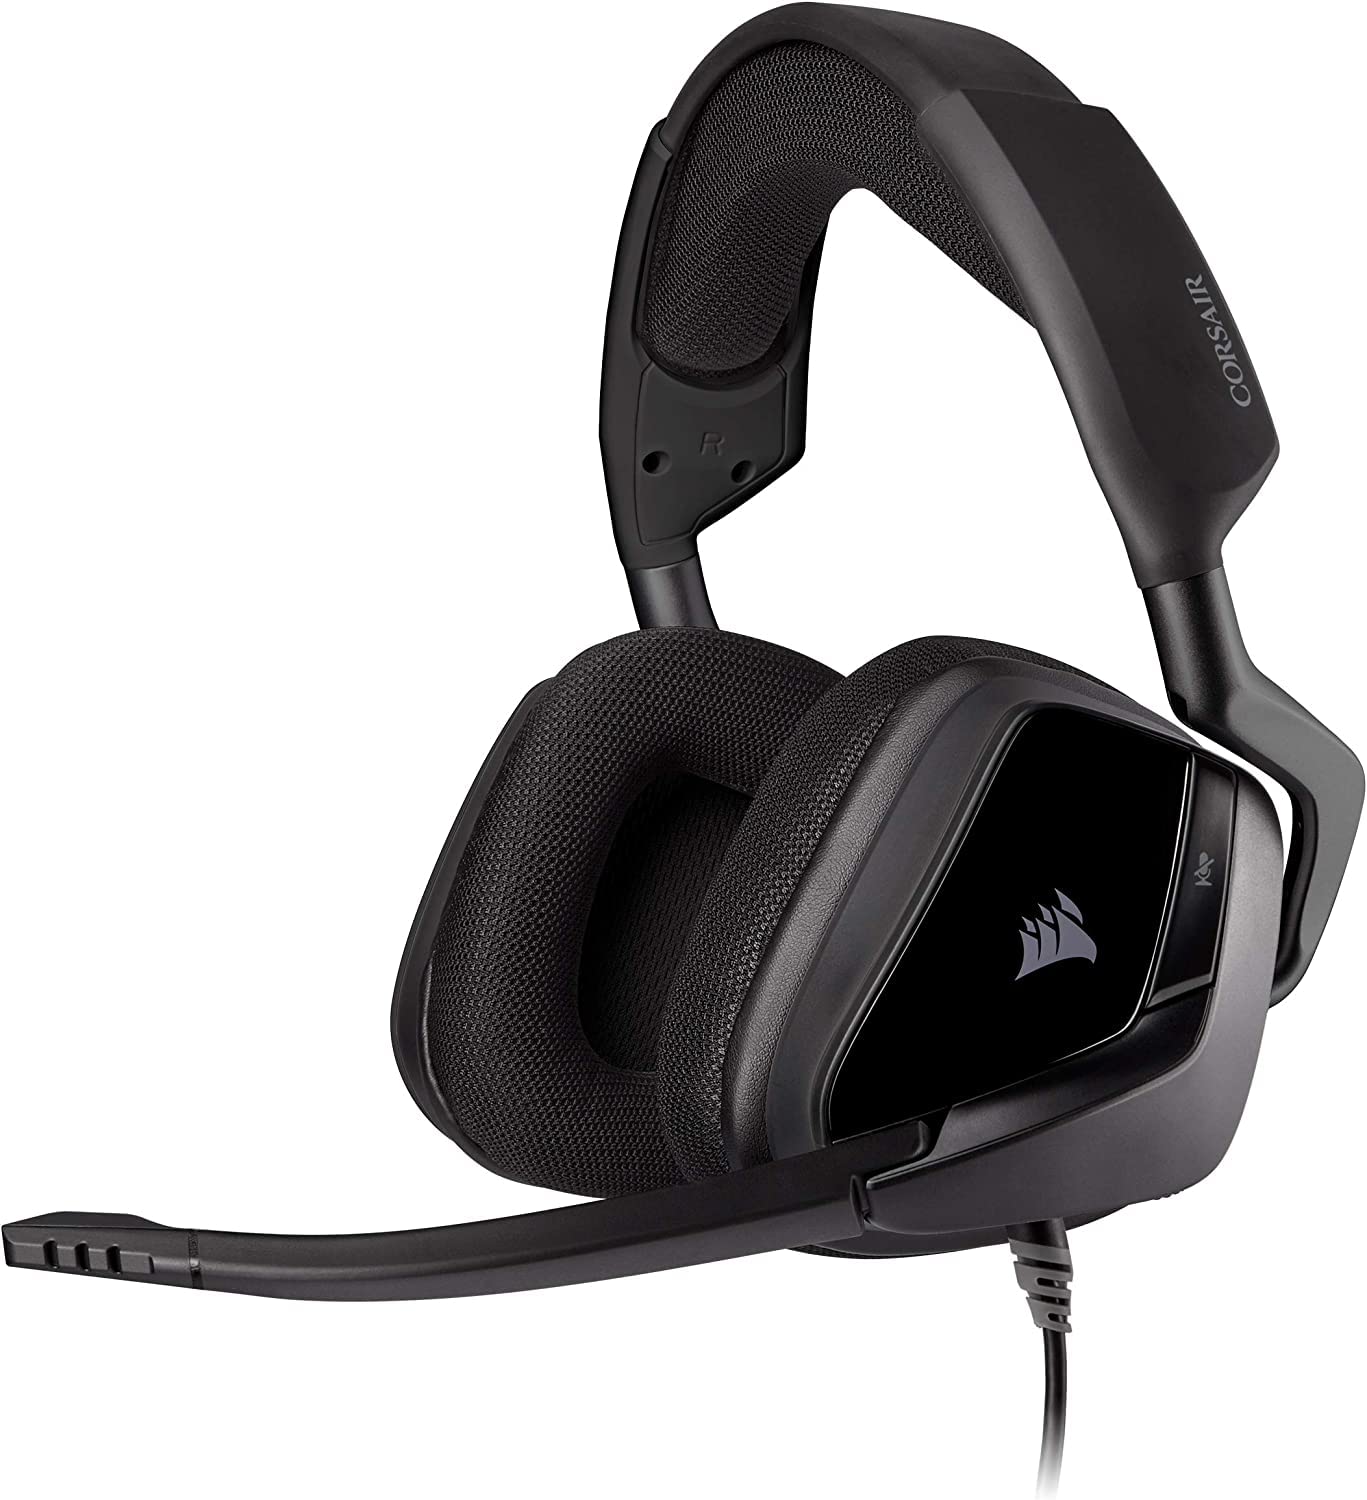 Corsair Void Elite Stereo Wired Gaming Headset Compatible with PC, PS4, Xbox One,and Mobile Devices - - Carbon (Renewed)